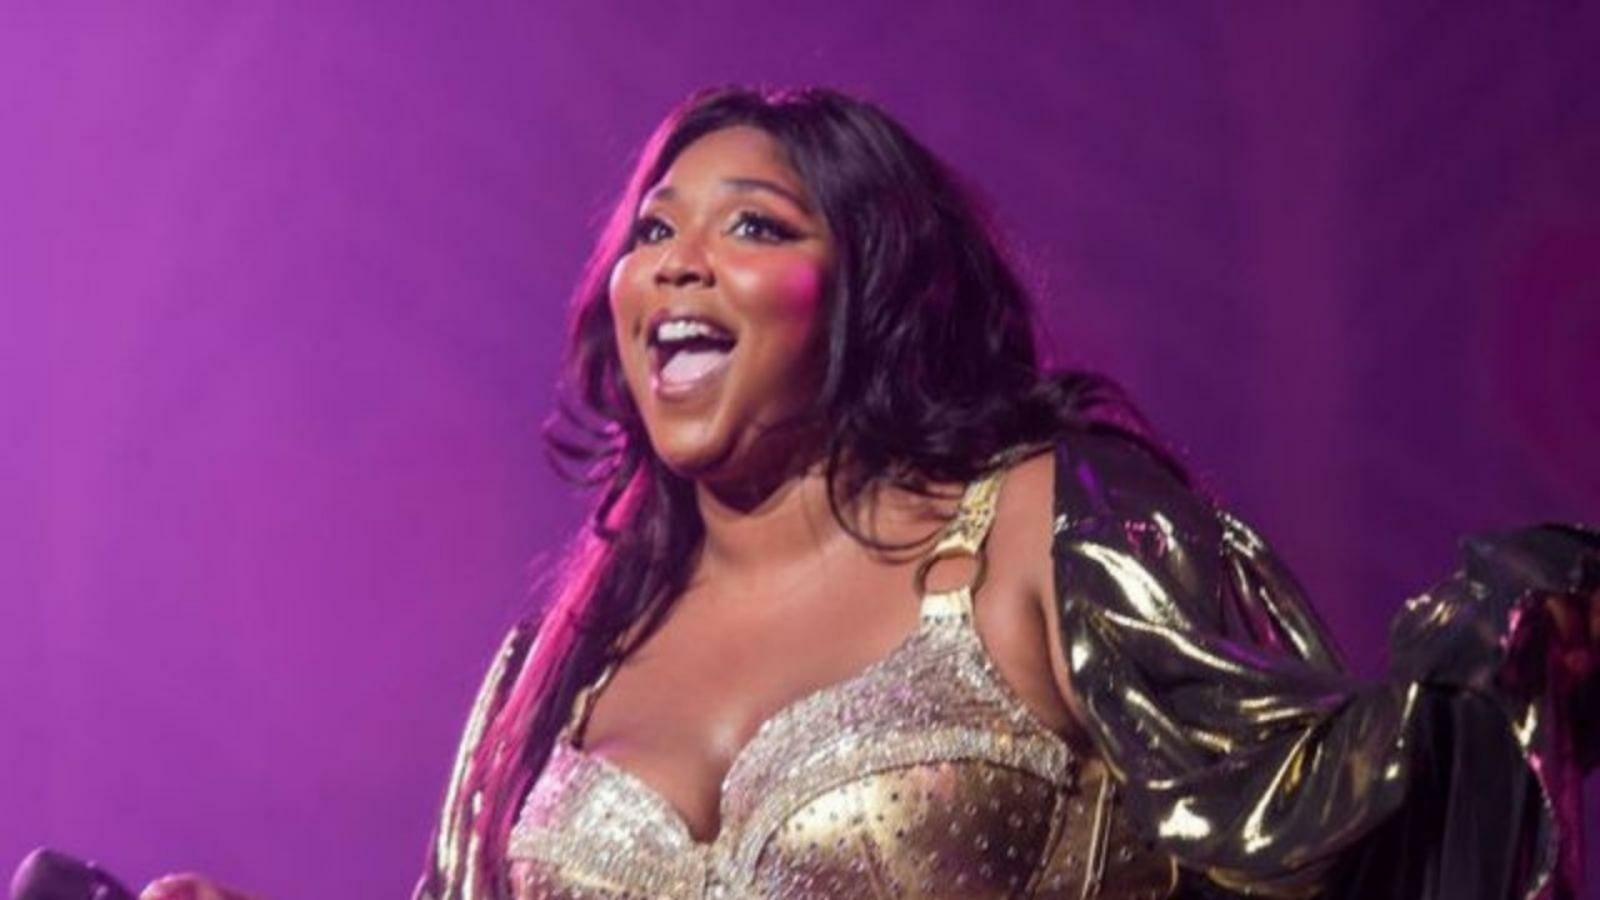 Abortion and Planned Parenthood Funds Will Receive $1 Million From Lizzo